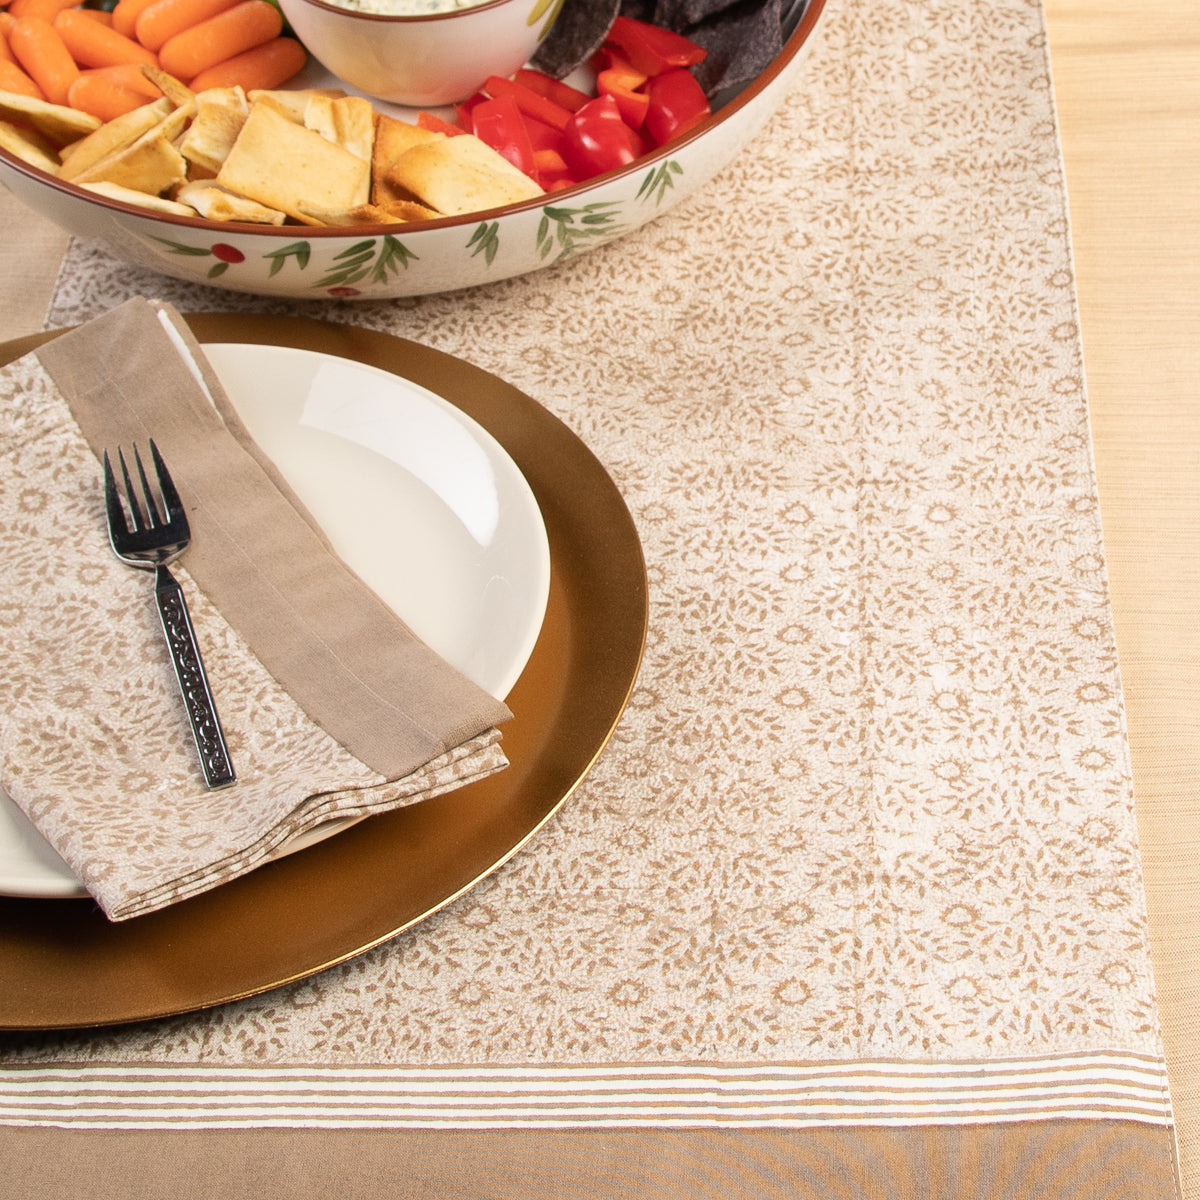 72” Table Runner By Tag – Natural Fabric Table Protector & Décor